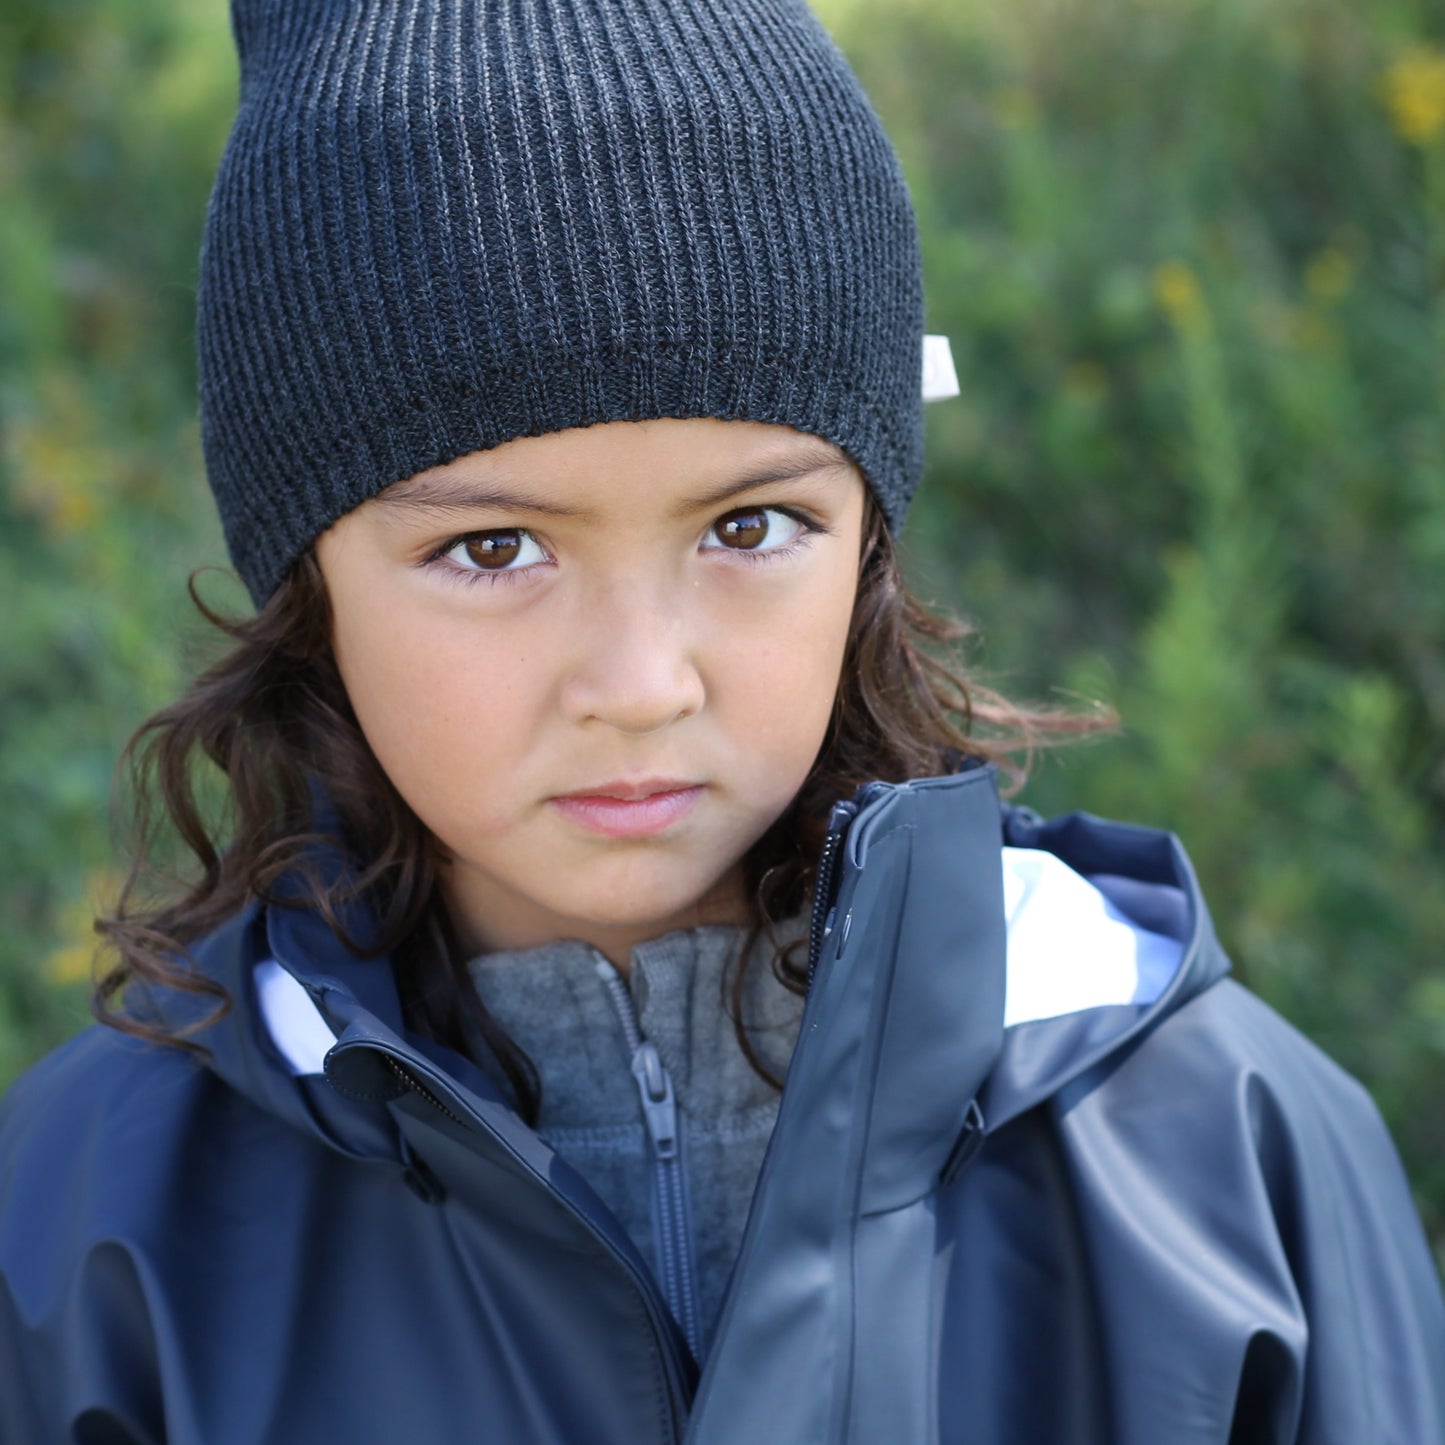 BMS Child Softskin Rain Jacket - SALE - 30% OFF – Warmth and Weather